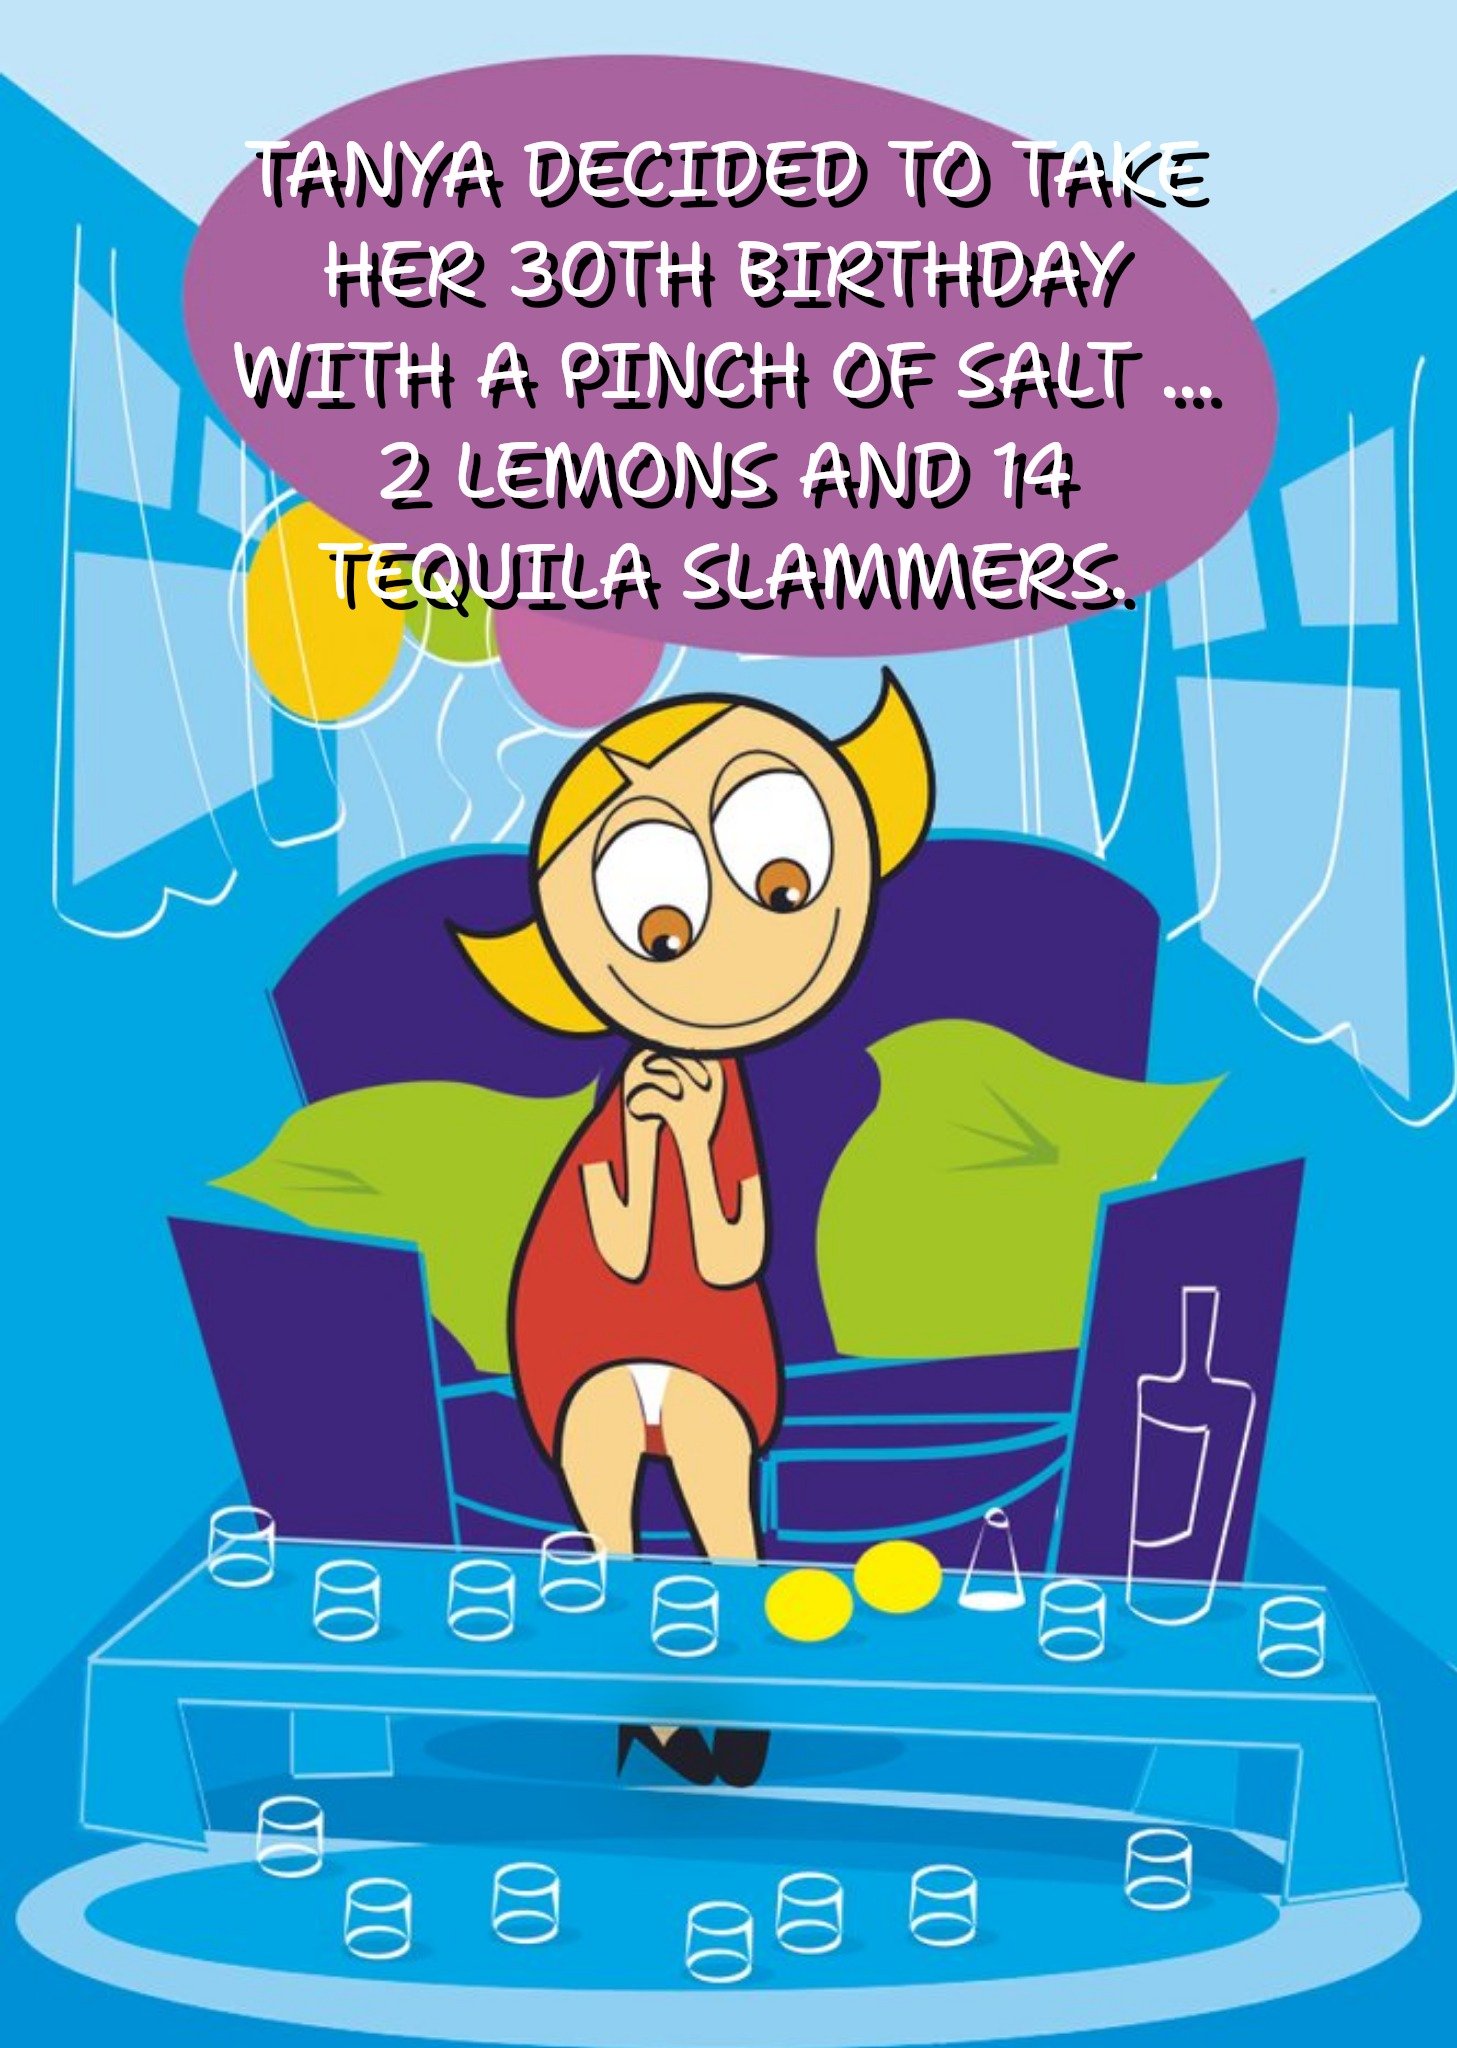 Moonpig 2 Lemons And 14 Tequila Slammers Happy 30th Birthday Card, Large